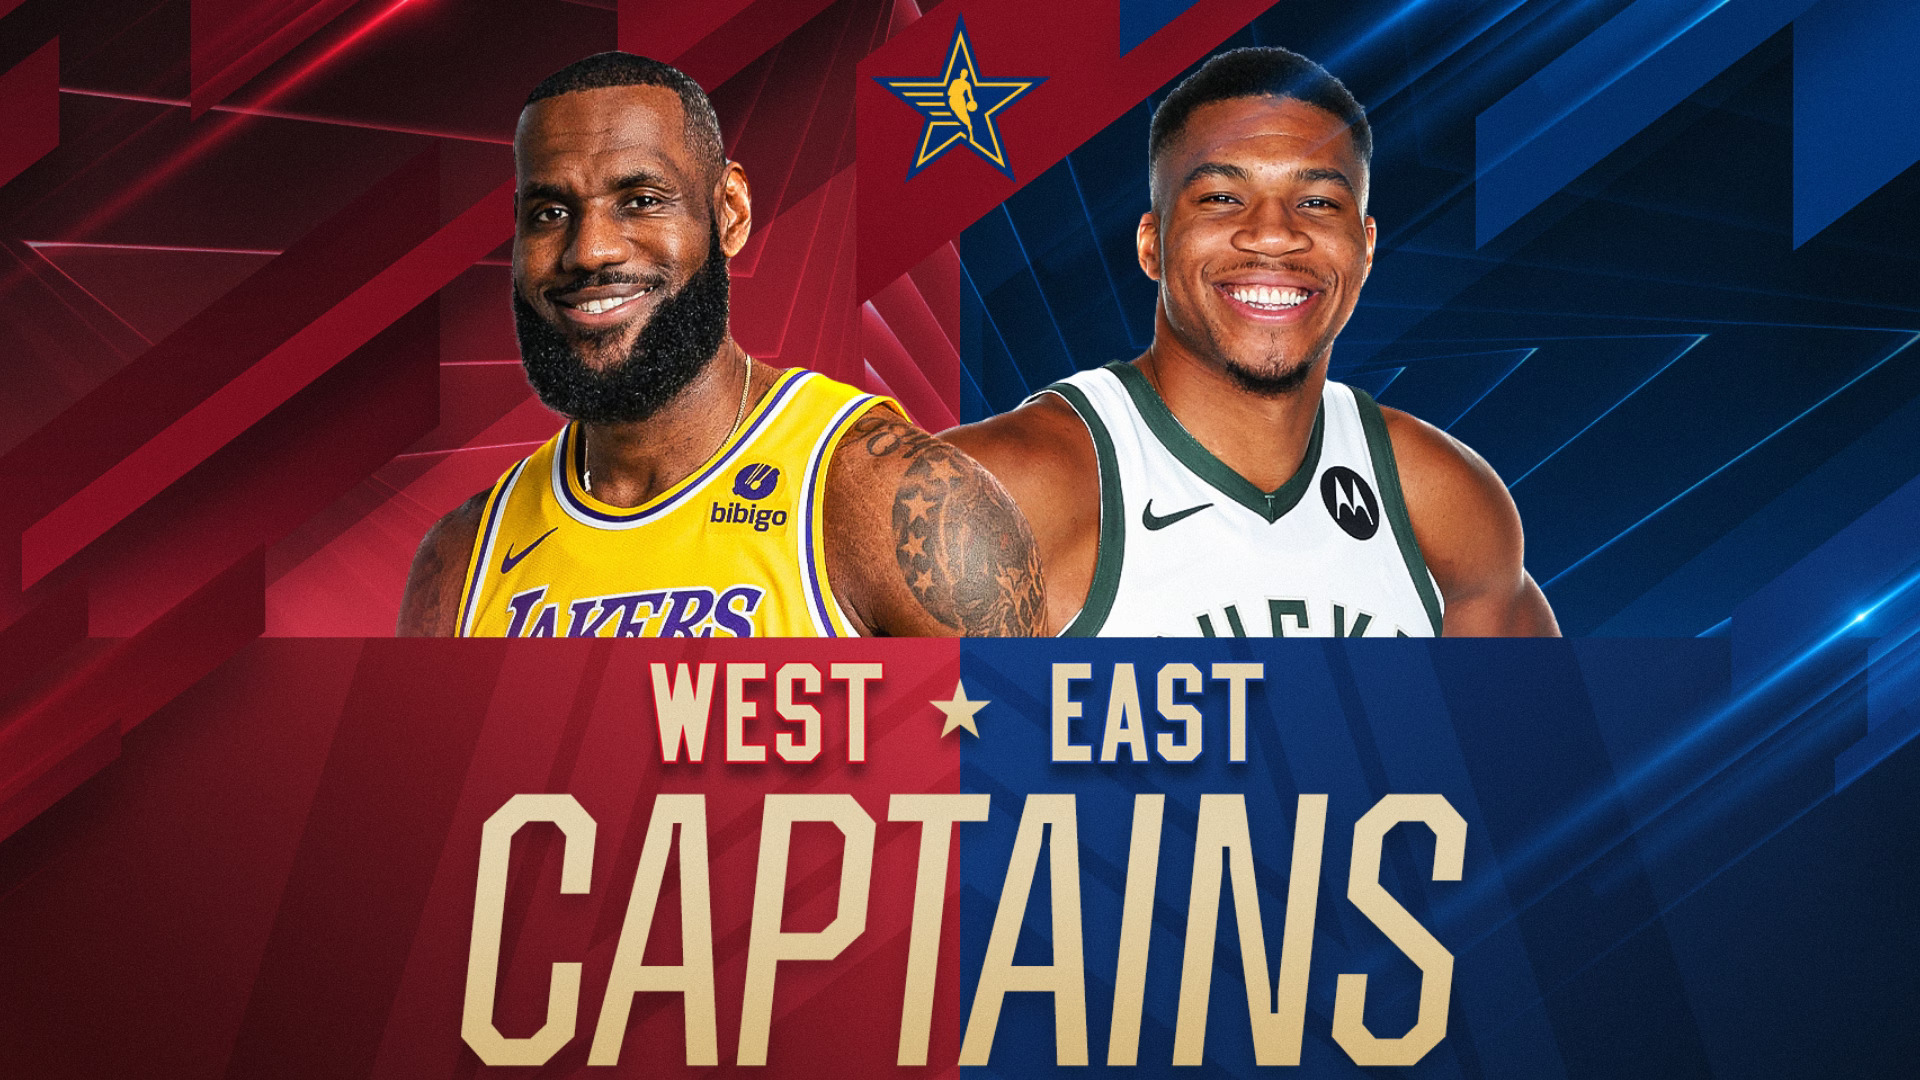 west and east captains